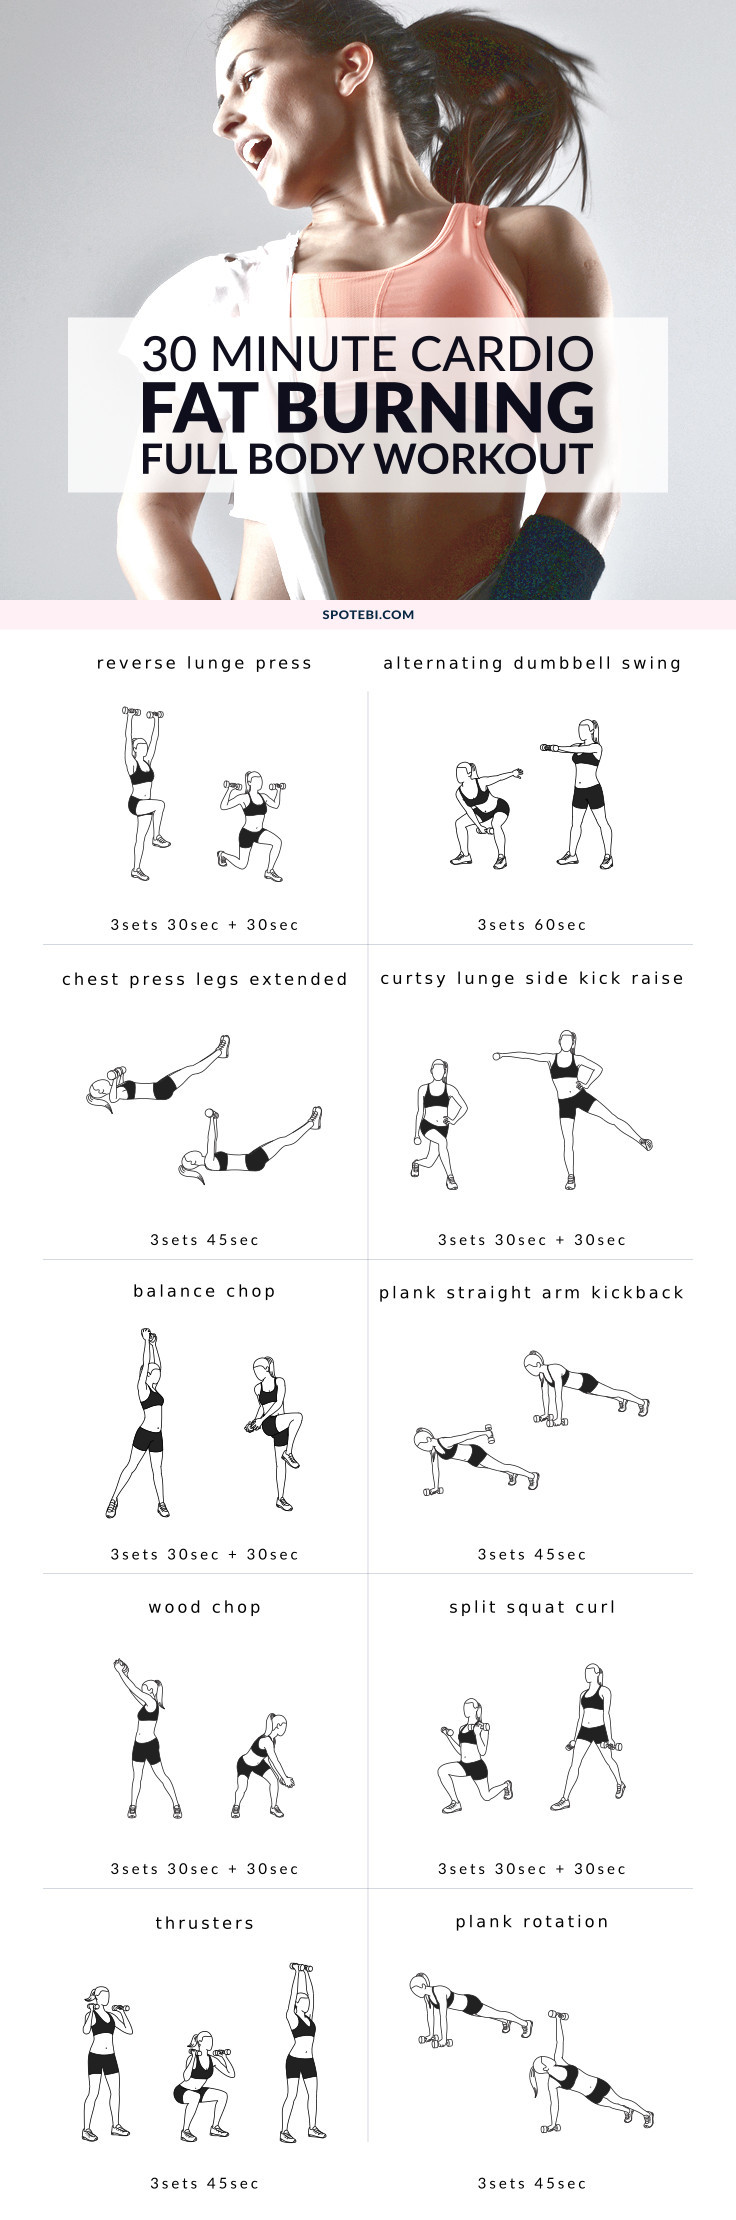 Fat Burning Workout With Weights
 30 Minute Full Body Fat Burning Workout